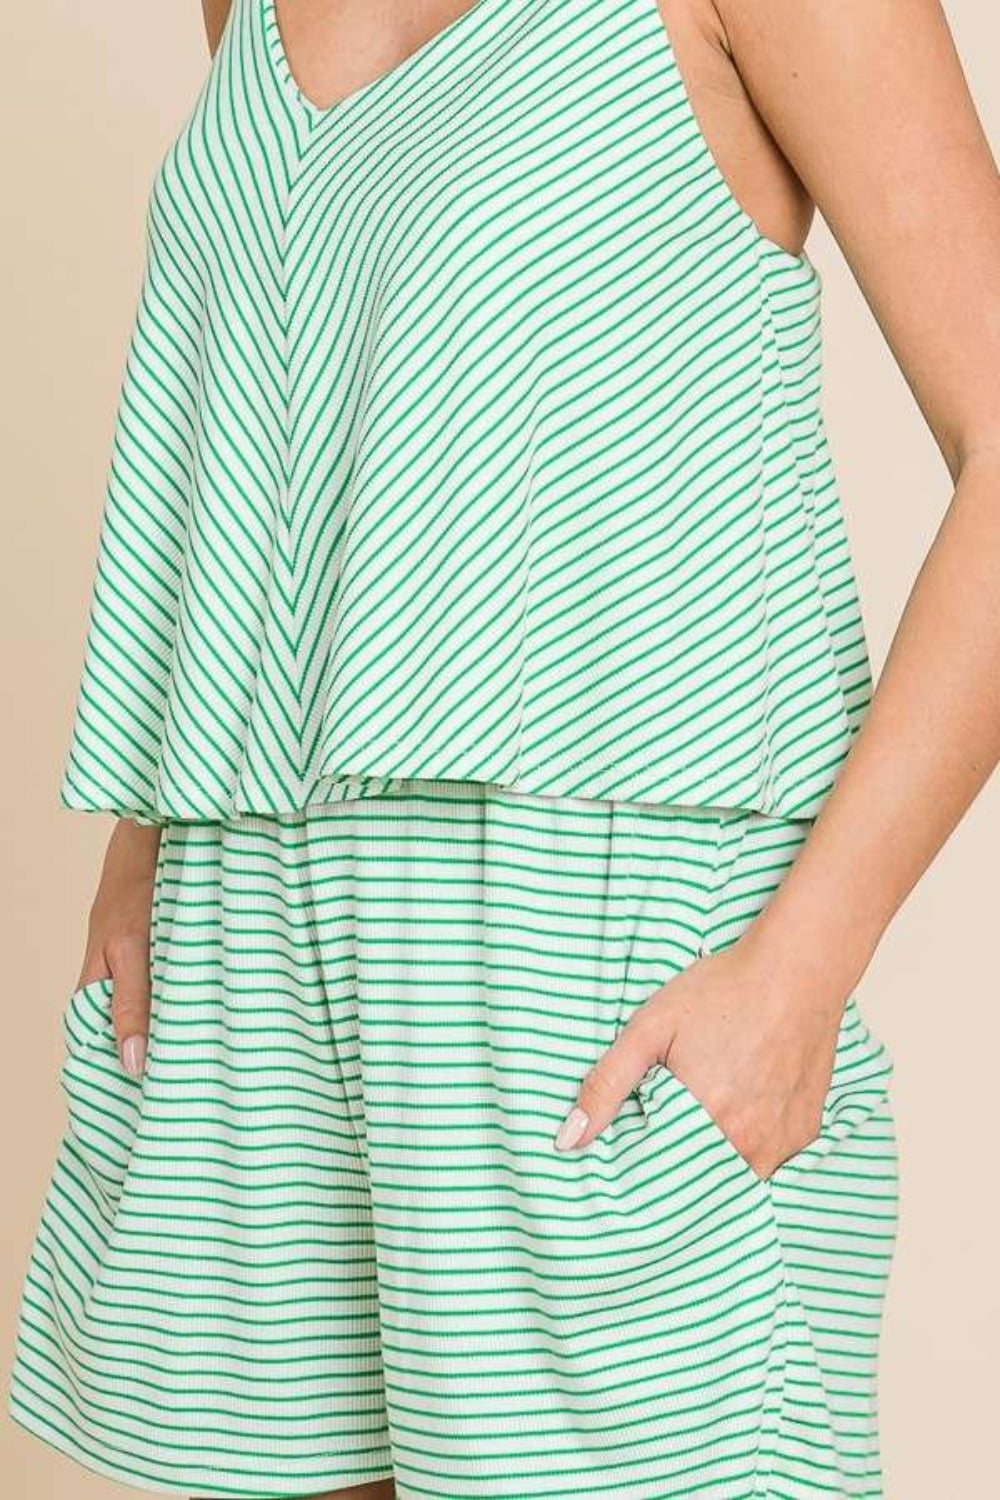 Get summer-ready with the chic, striped Culture Code Romper – perfect blend of comfort, style, and versatility for any occasion.